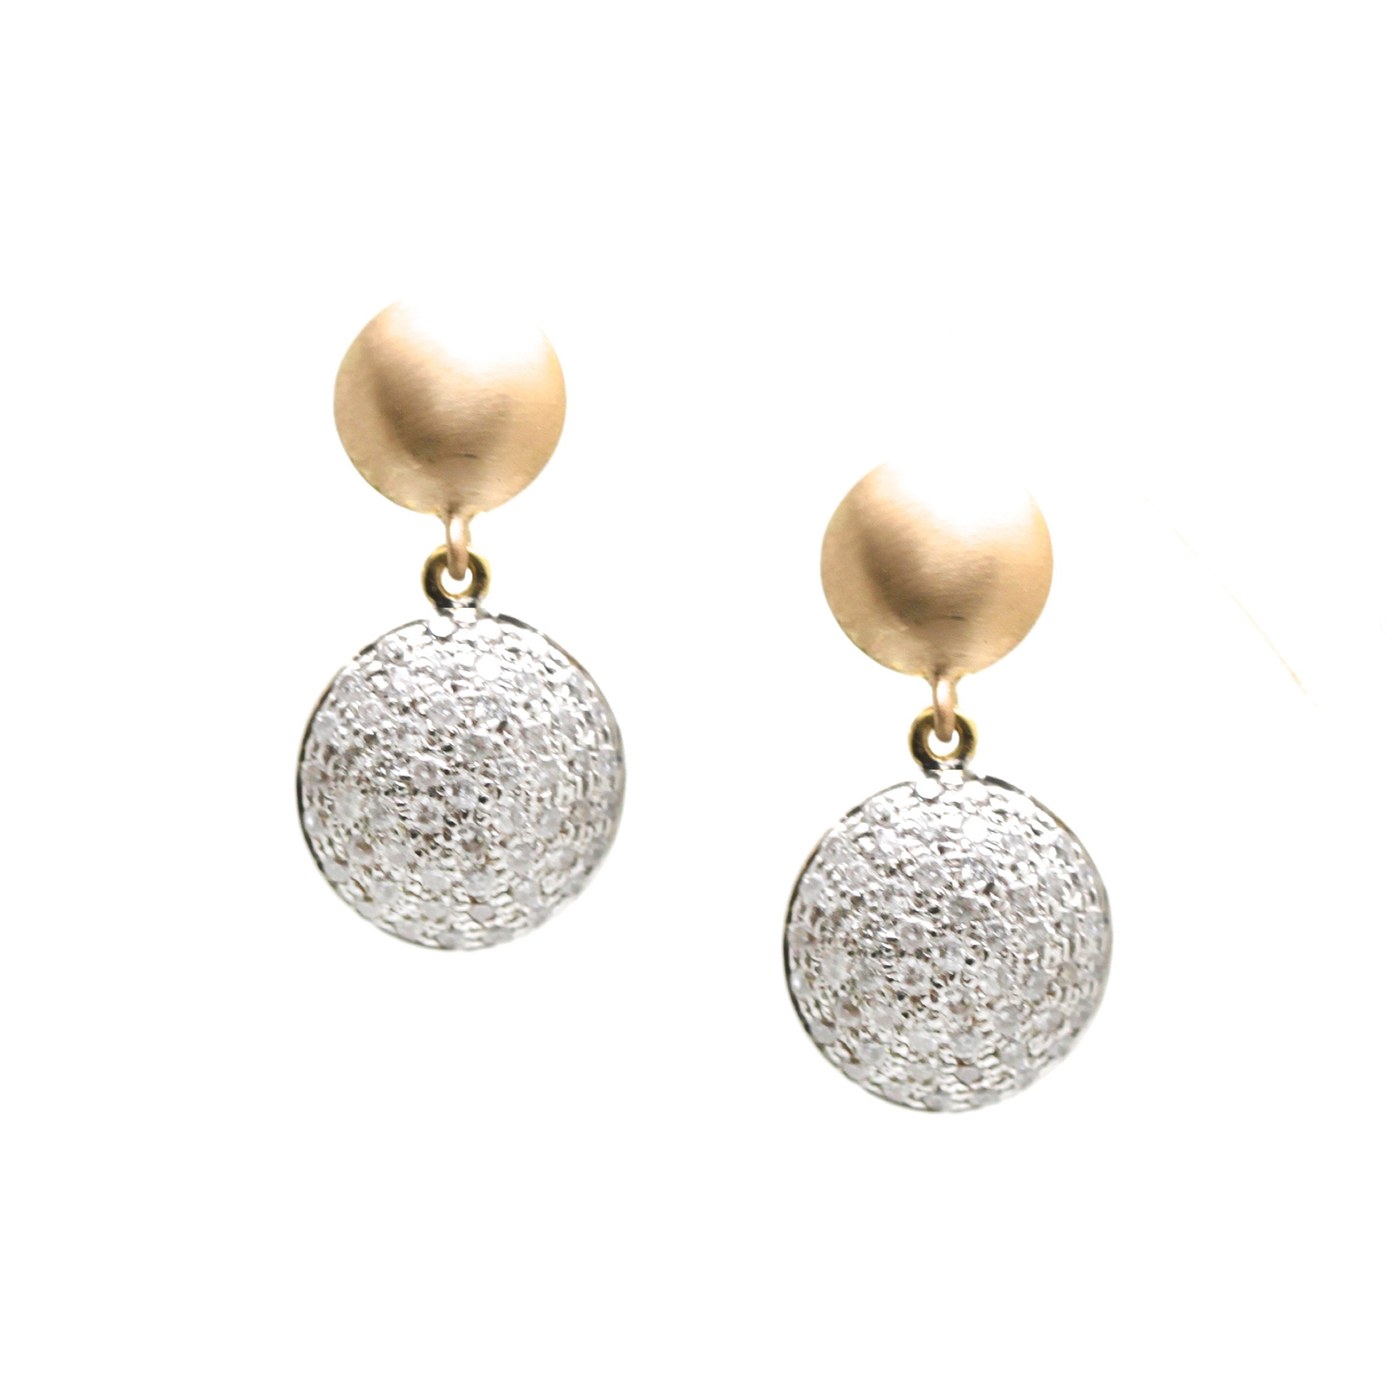 Lente Two Tier Earrings with Pave Diamond in 18k Gold